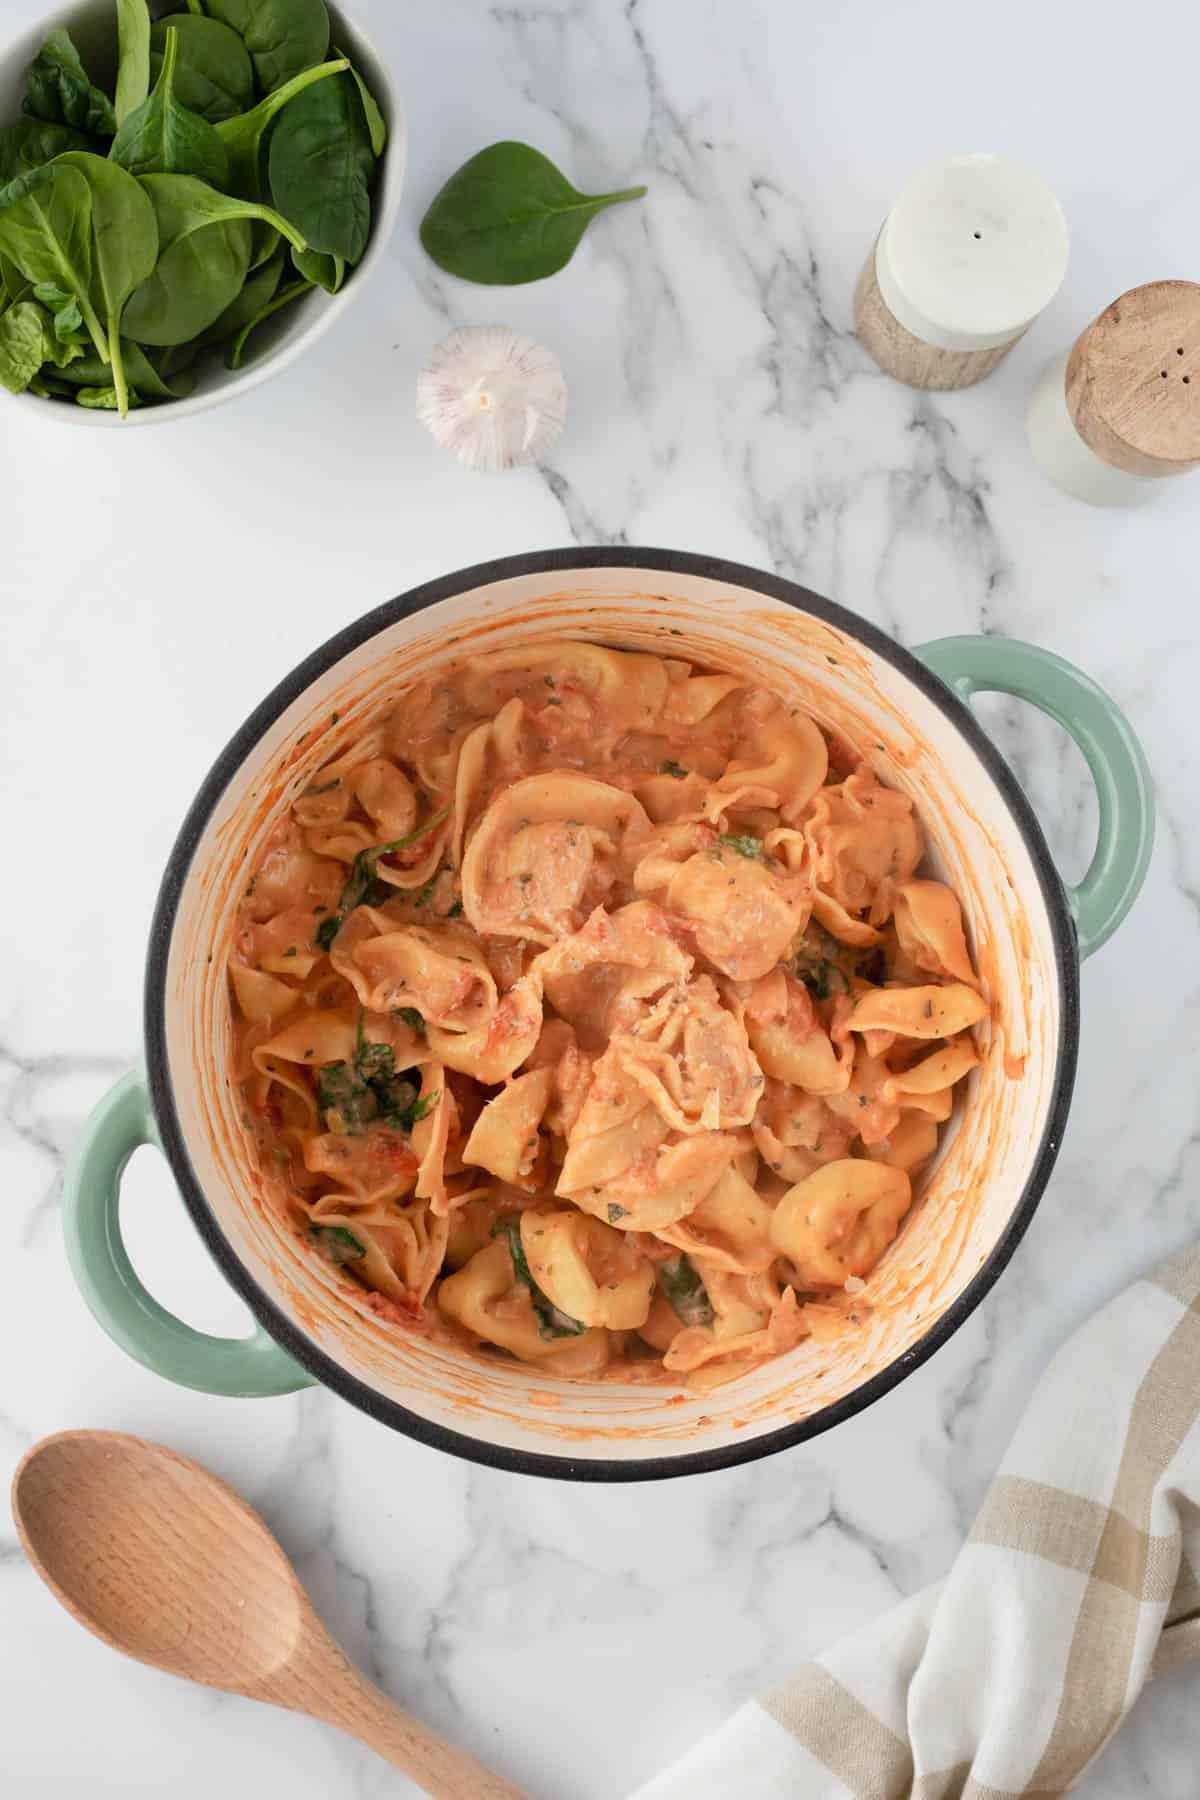 A pot of creamy tomato and spinach tortellini next to a bowl of spinach and a wooden spoon.